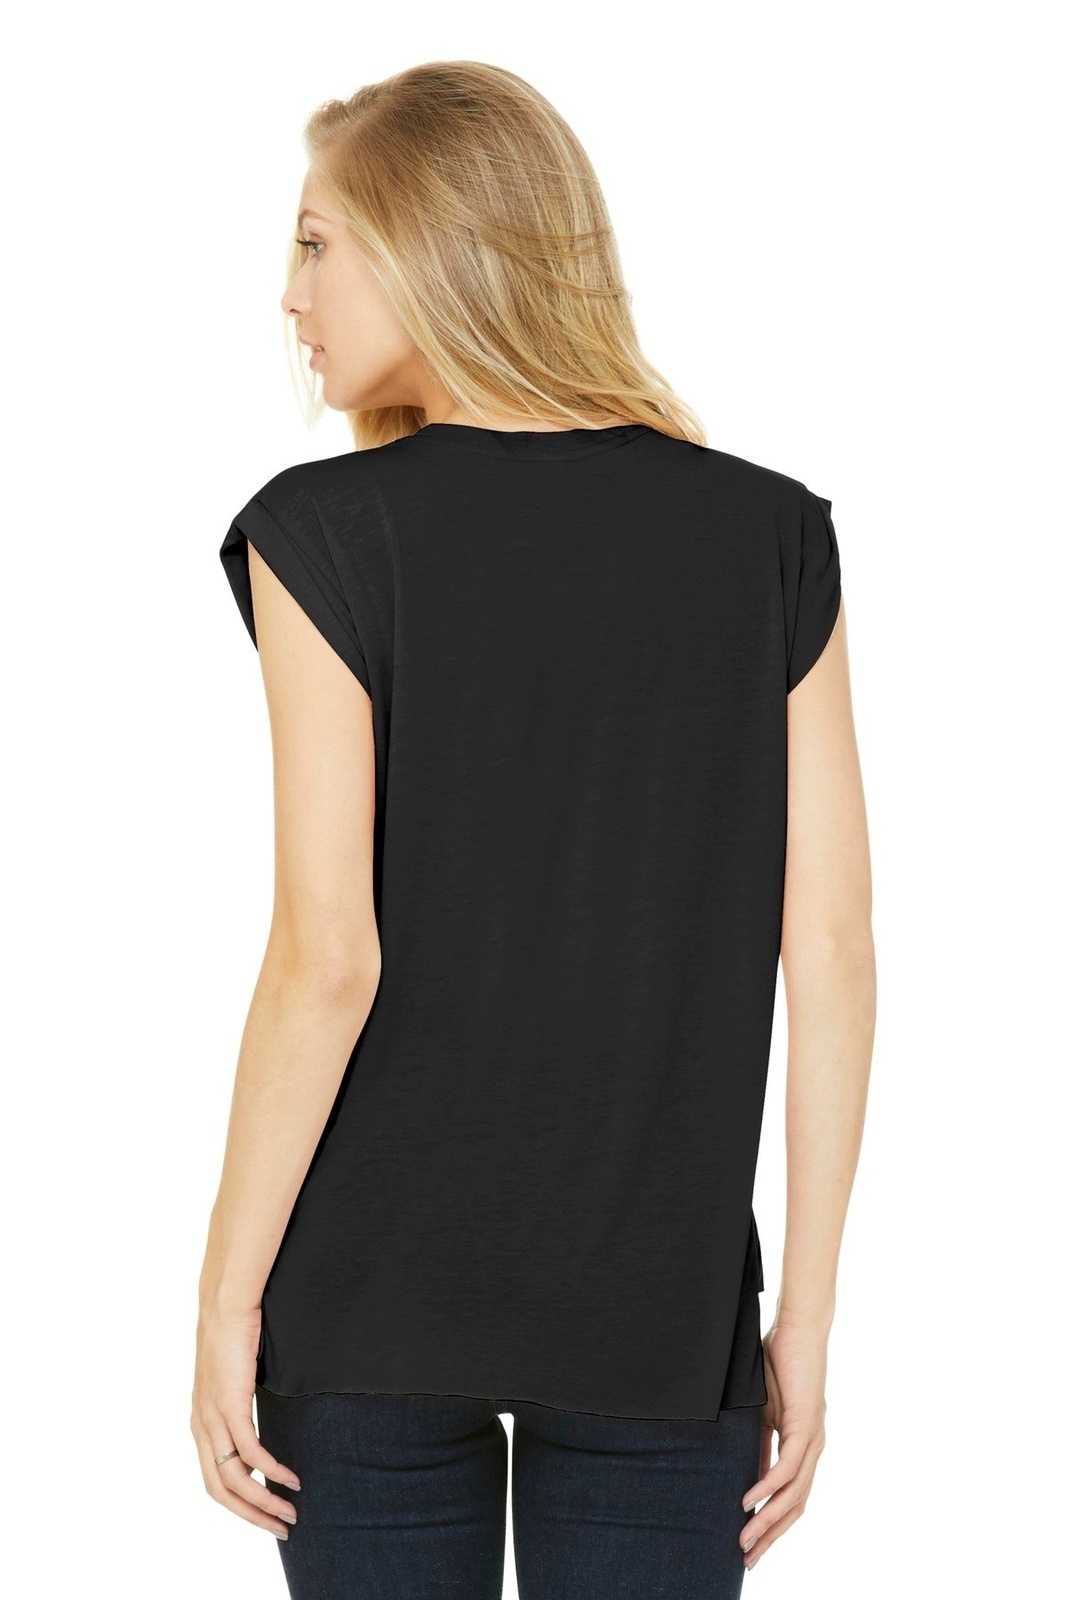 Bella + Canvas 8804 Women's Flowy Muscle Tee with Rolled Cuffs - Black - HIT a Double